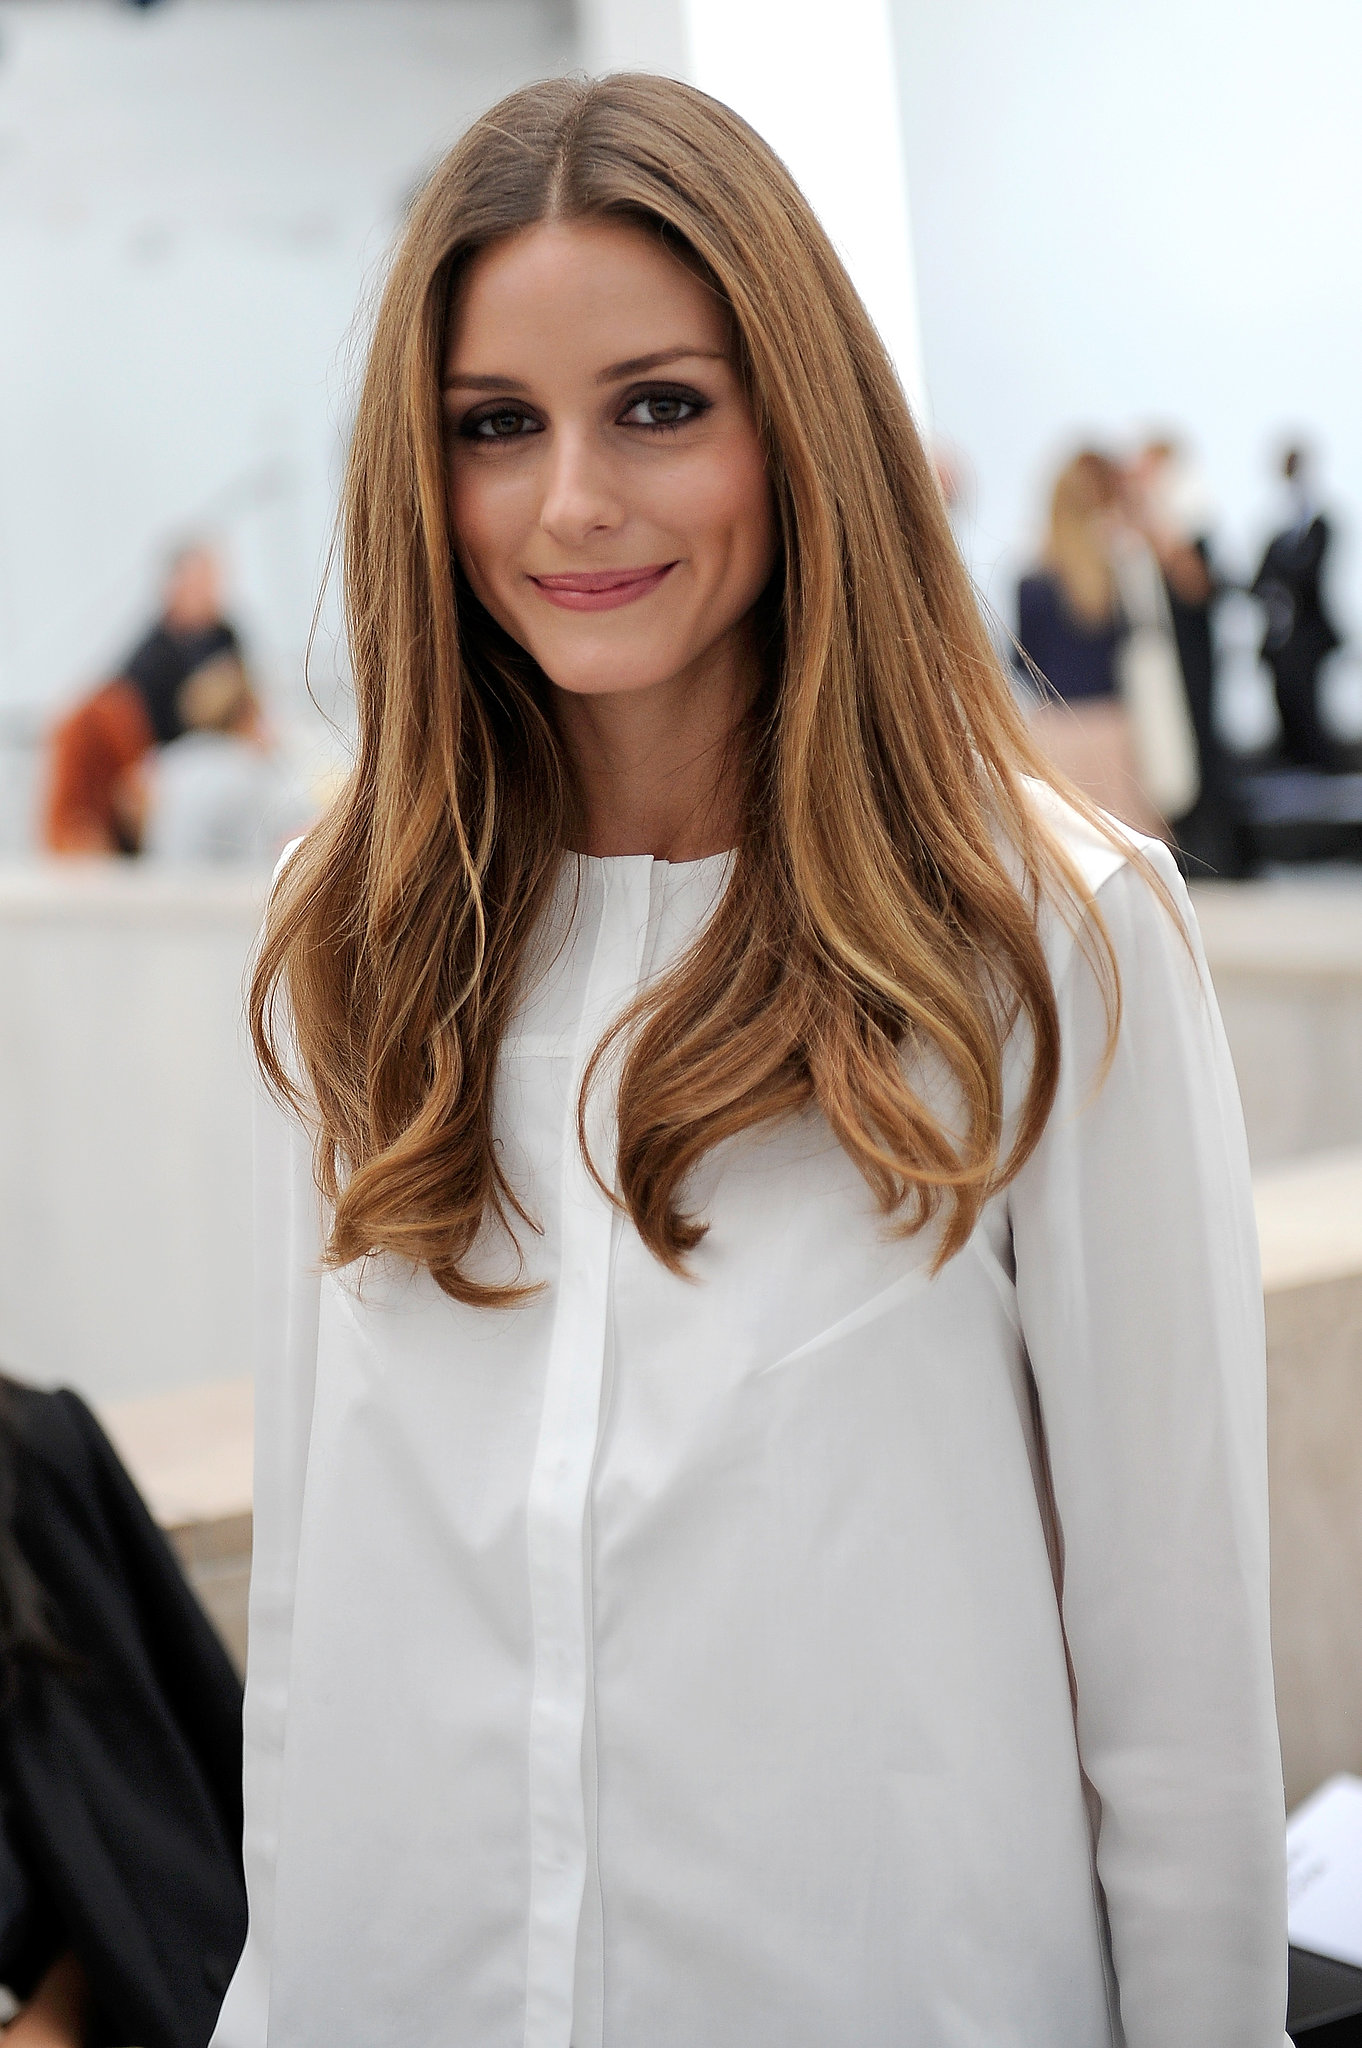 Amazing Olivia Palermo Pictures & Backgrounds